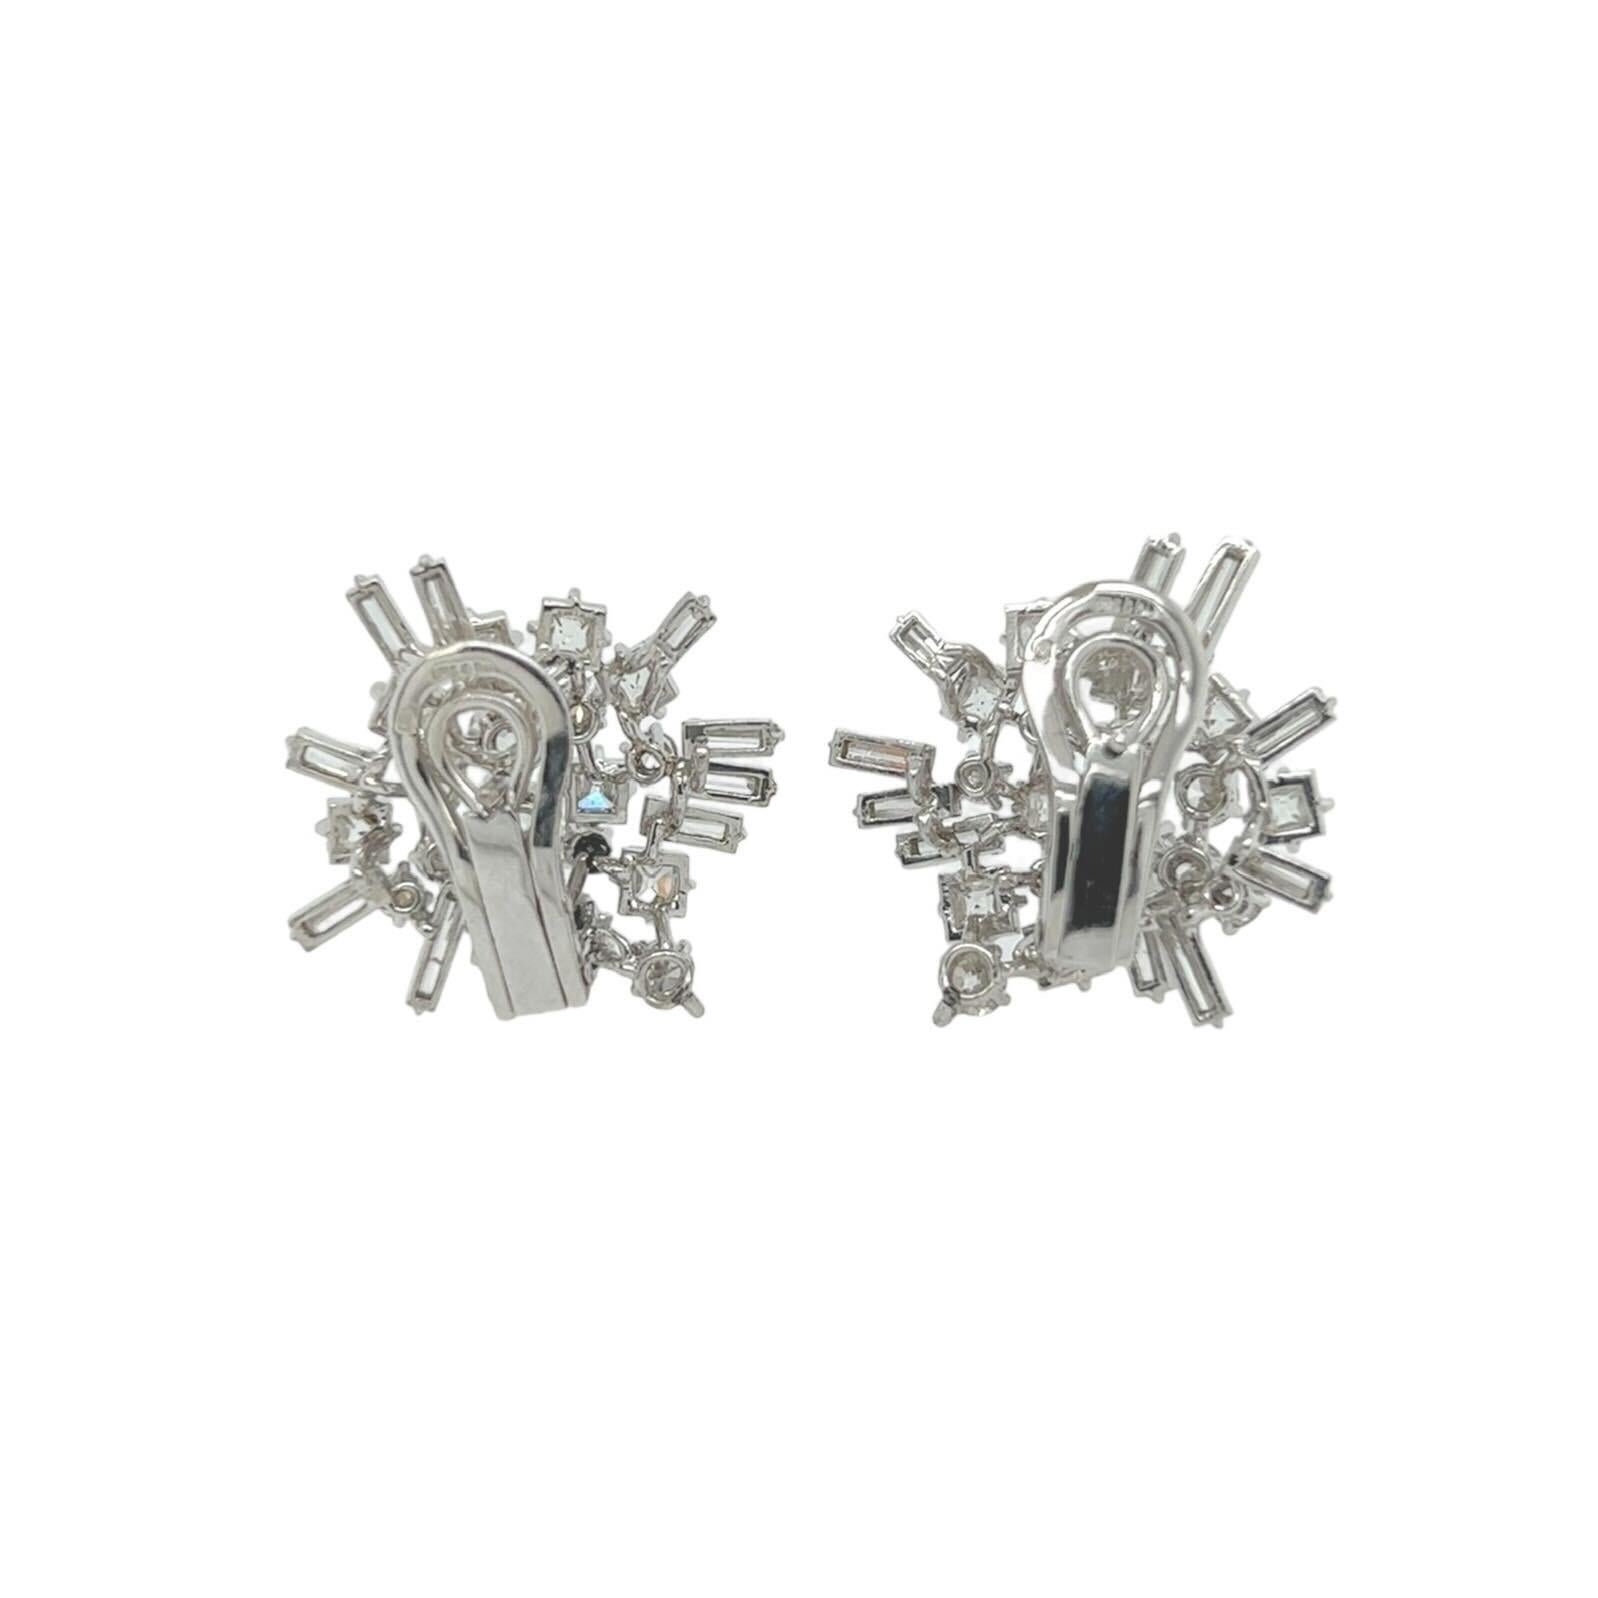 A pair of platinum and diamond earrings, French.  Each earring designed as a cluster with an extending spray set with ten (10) baguette cut diamonds, nine (9) round brilliant cut diamonds and eight (8) French cut diamonds, with 18 karat white gold